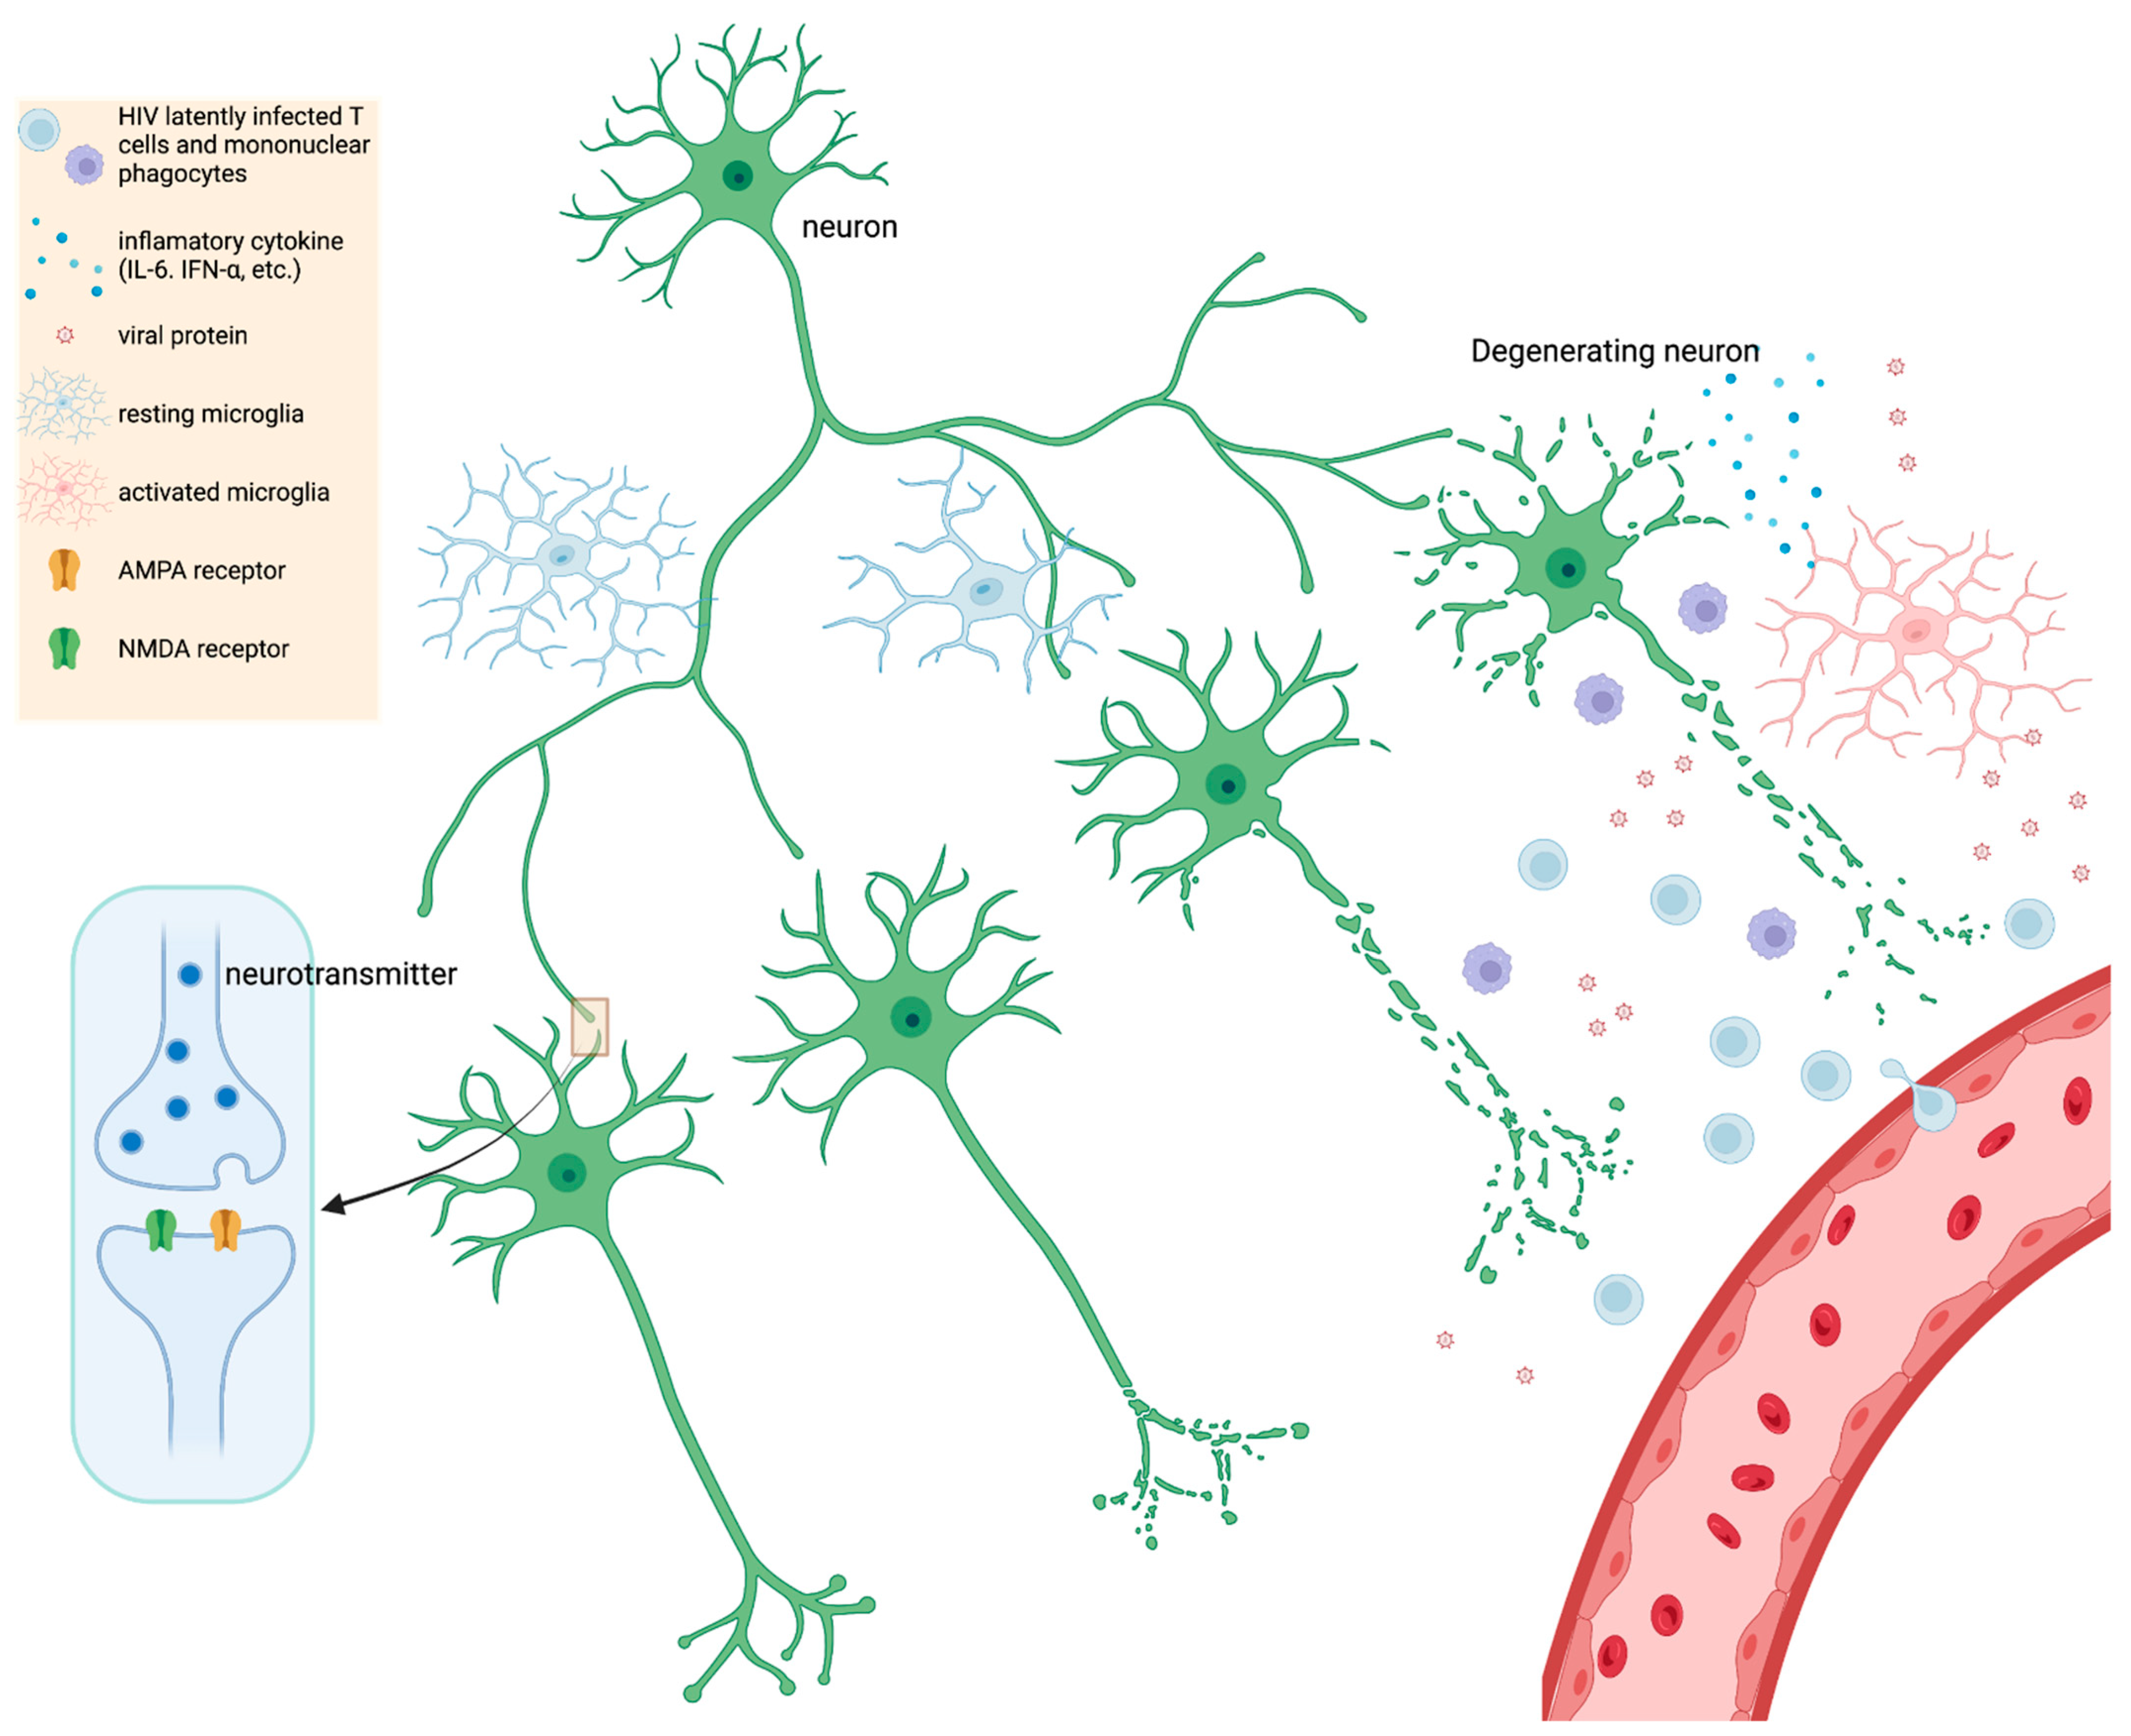 Microorganisms | Free Full-Text | A Rationale and Approach to the  Development of Specific Treatments for HIV Associated Neurocognitive  Impairment